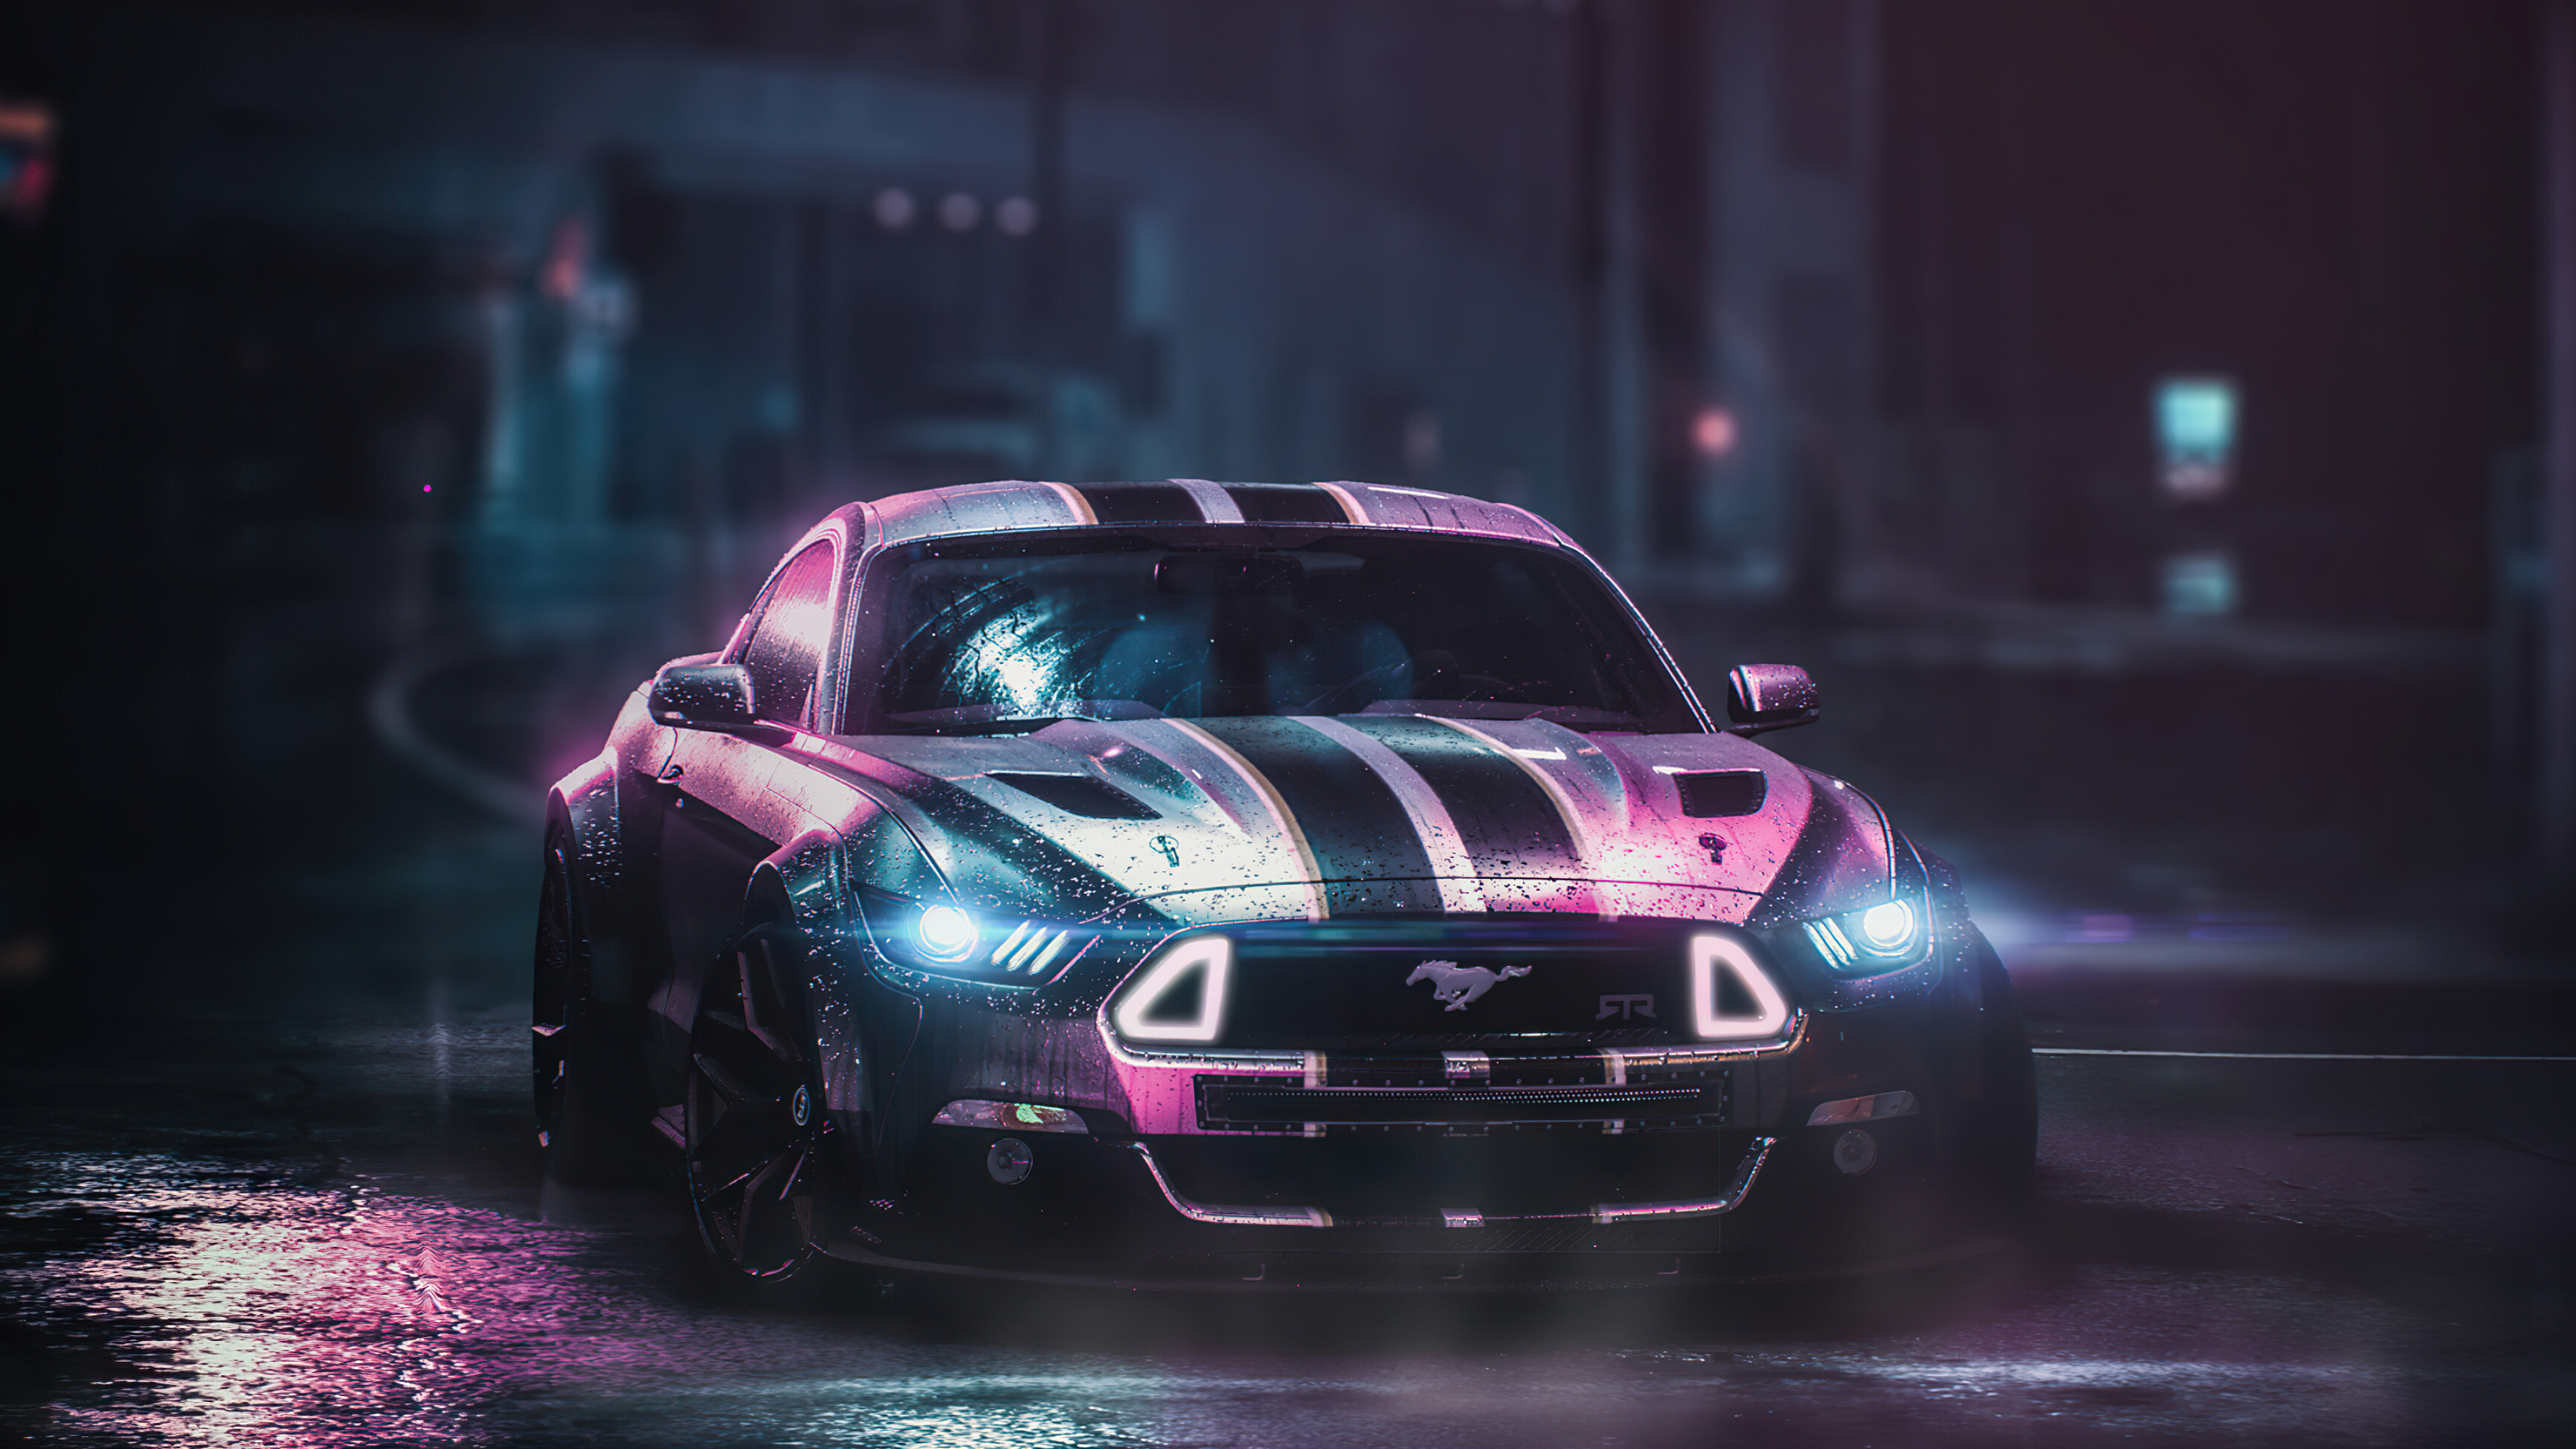 Ford: Mustang, Developed as a highly styled line of sporty coupes and convertibles. 3840x2160 4K Wallpaper.